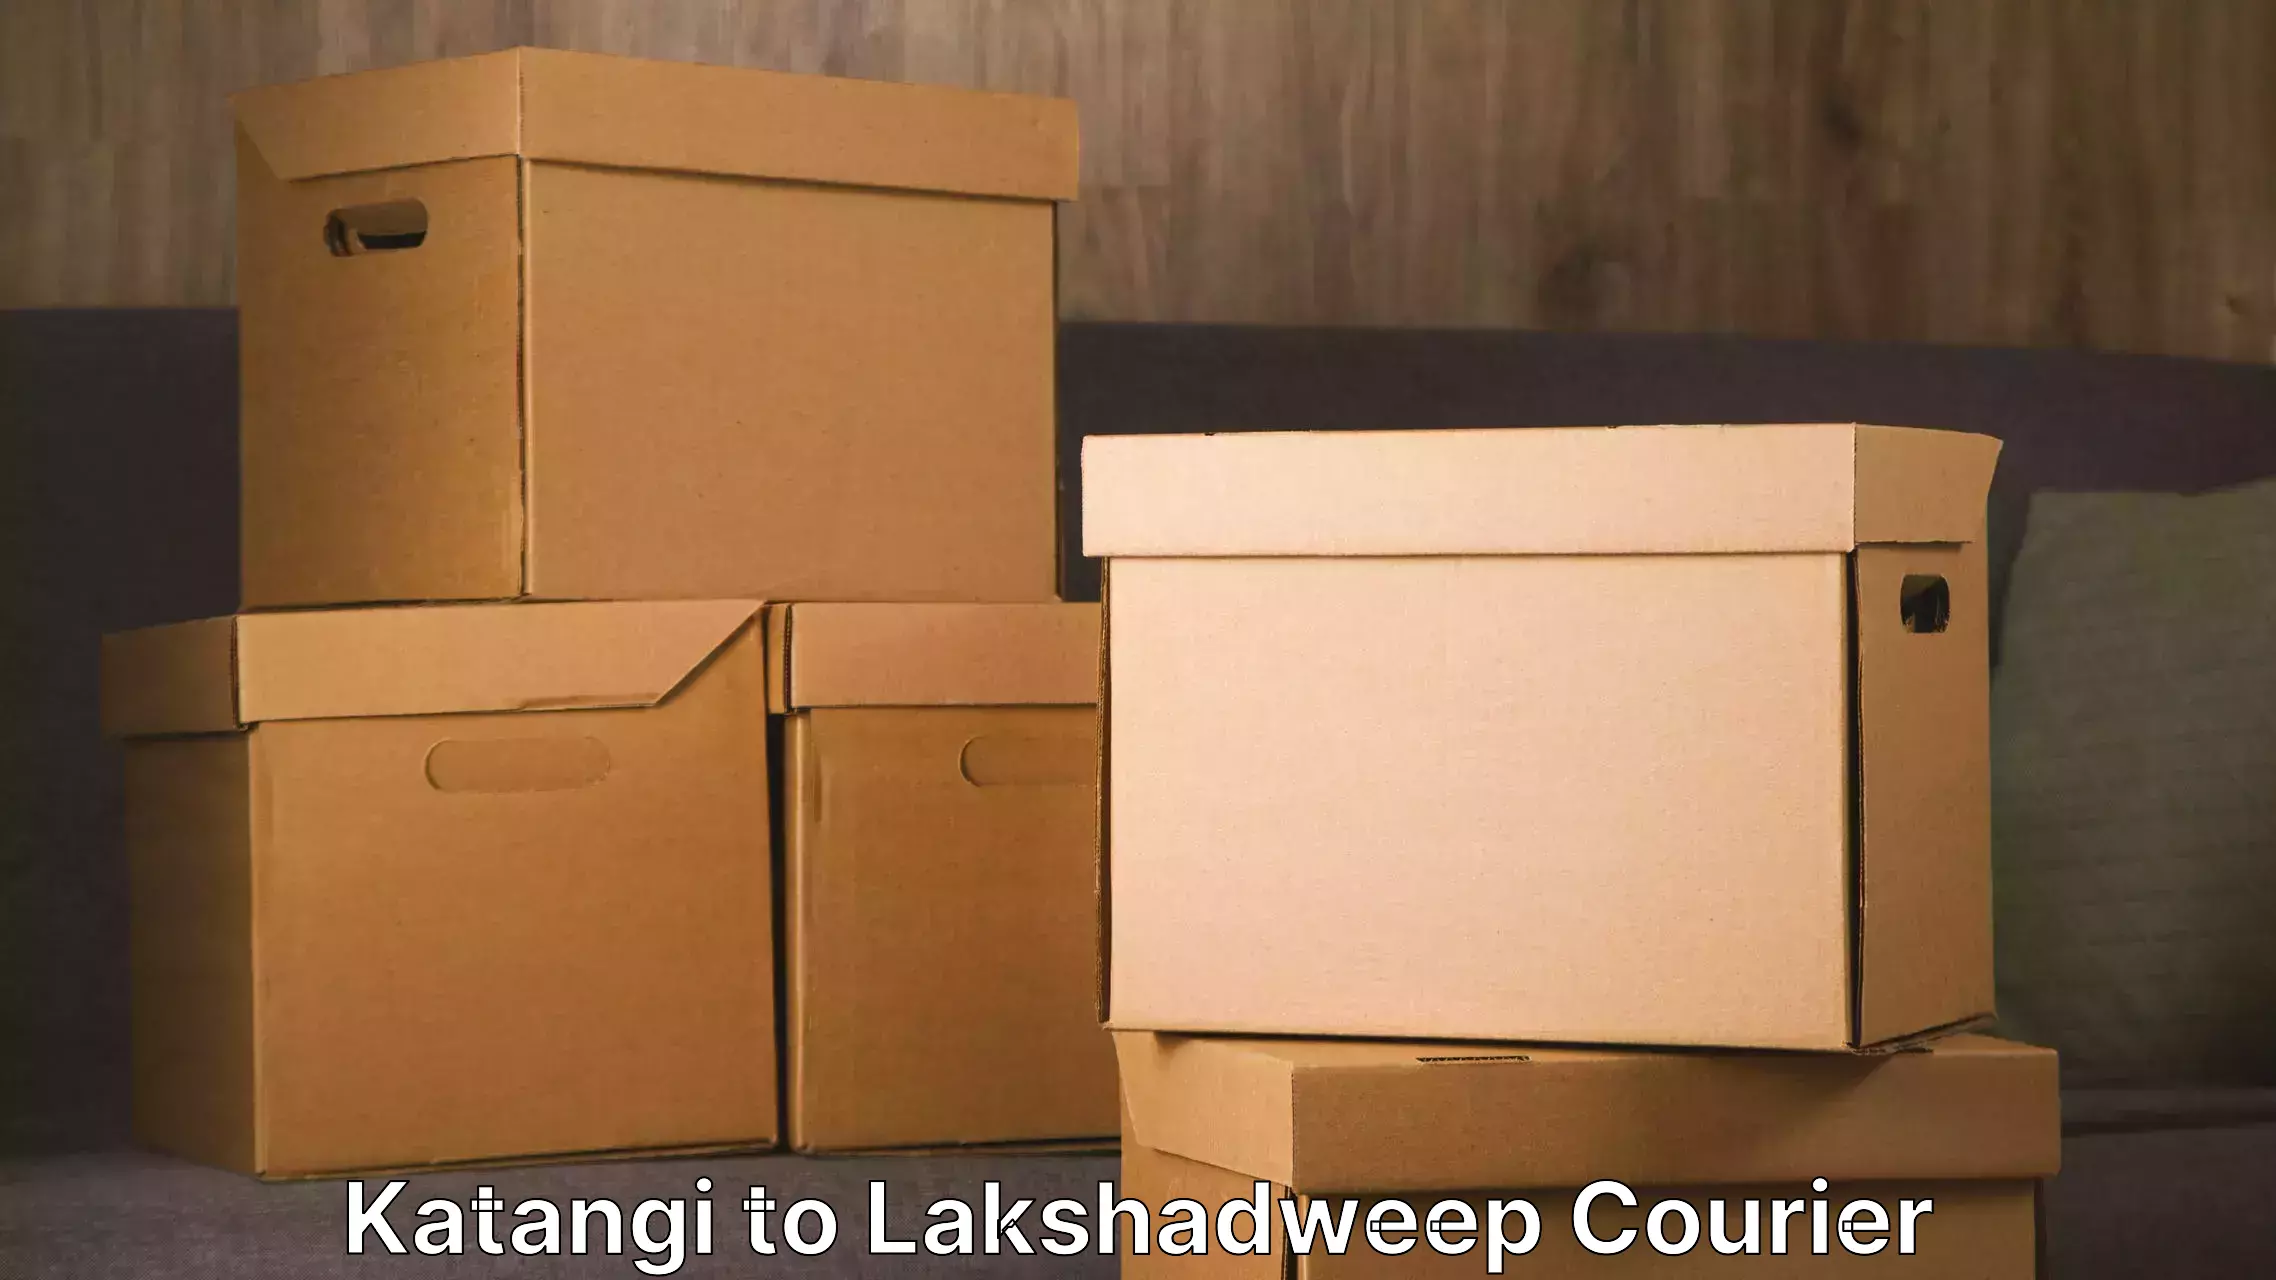 Quality relocation services in Katangi to Lakshadweep